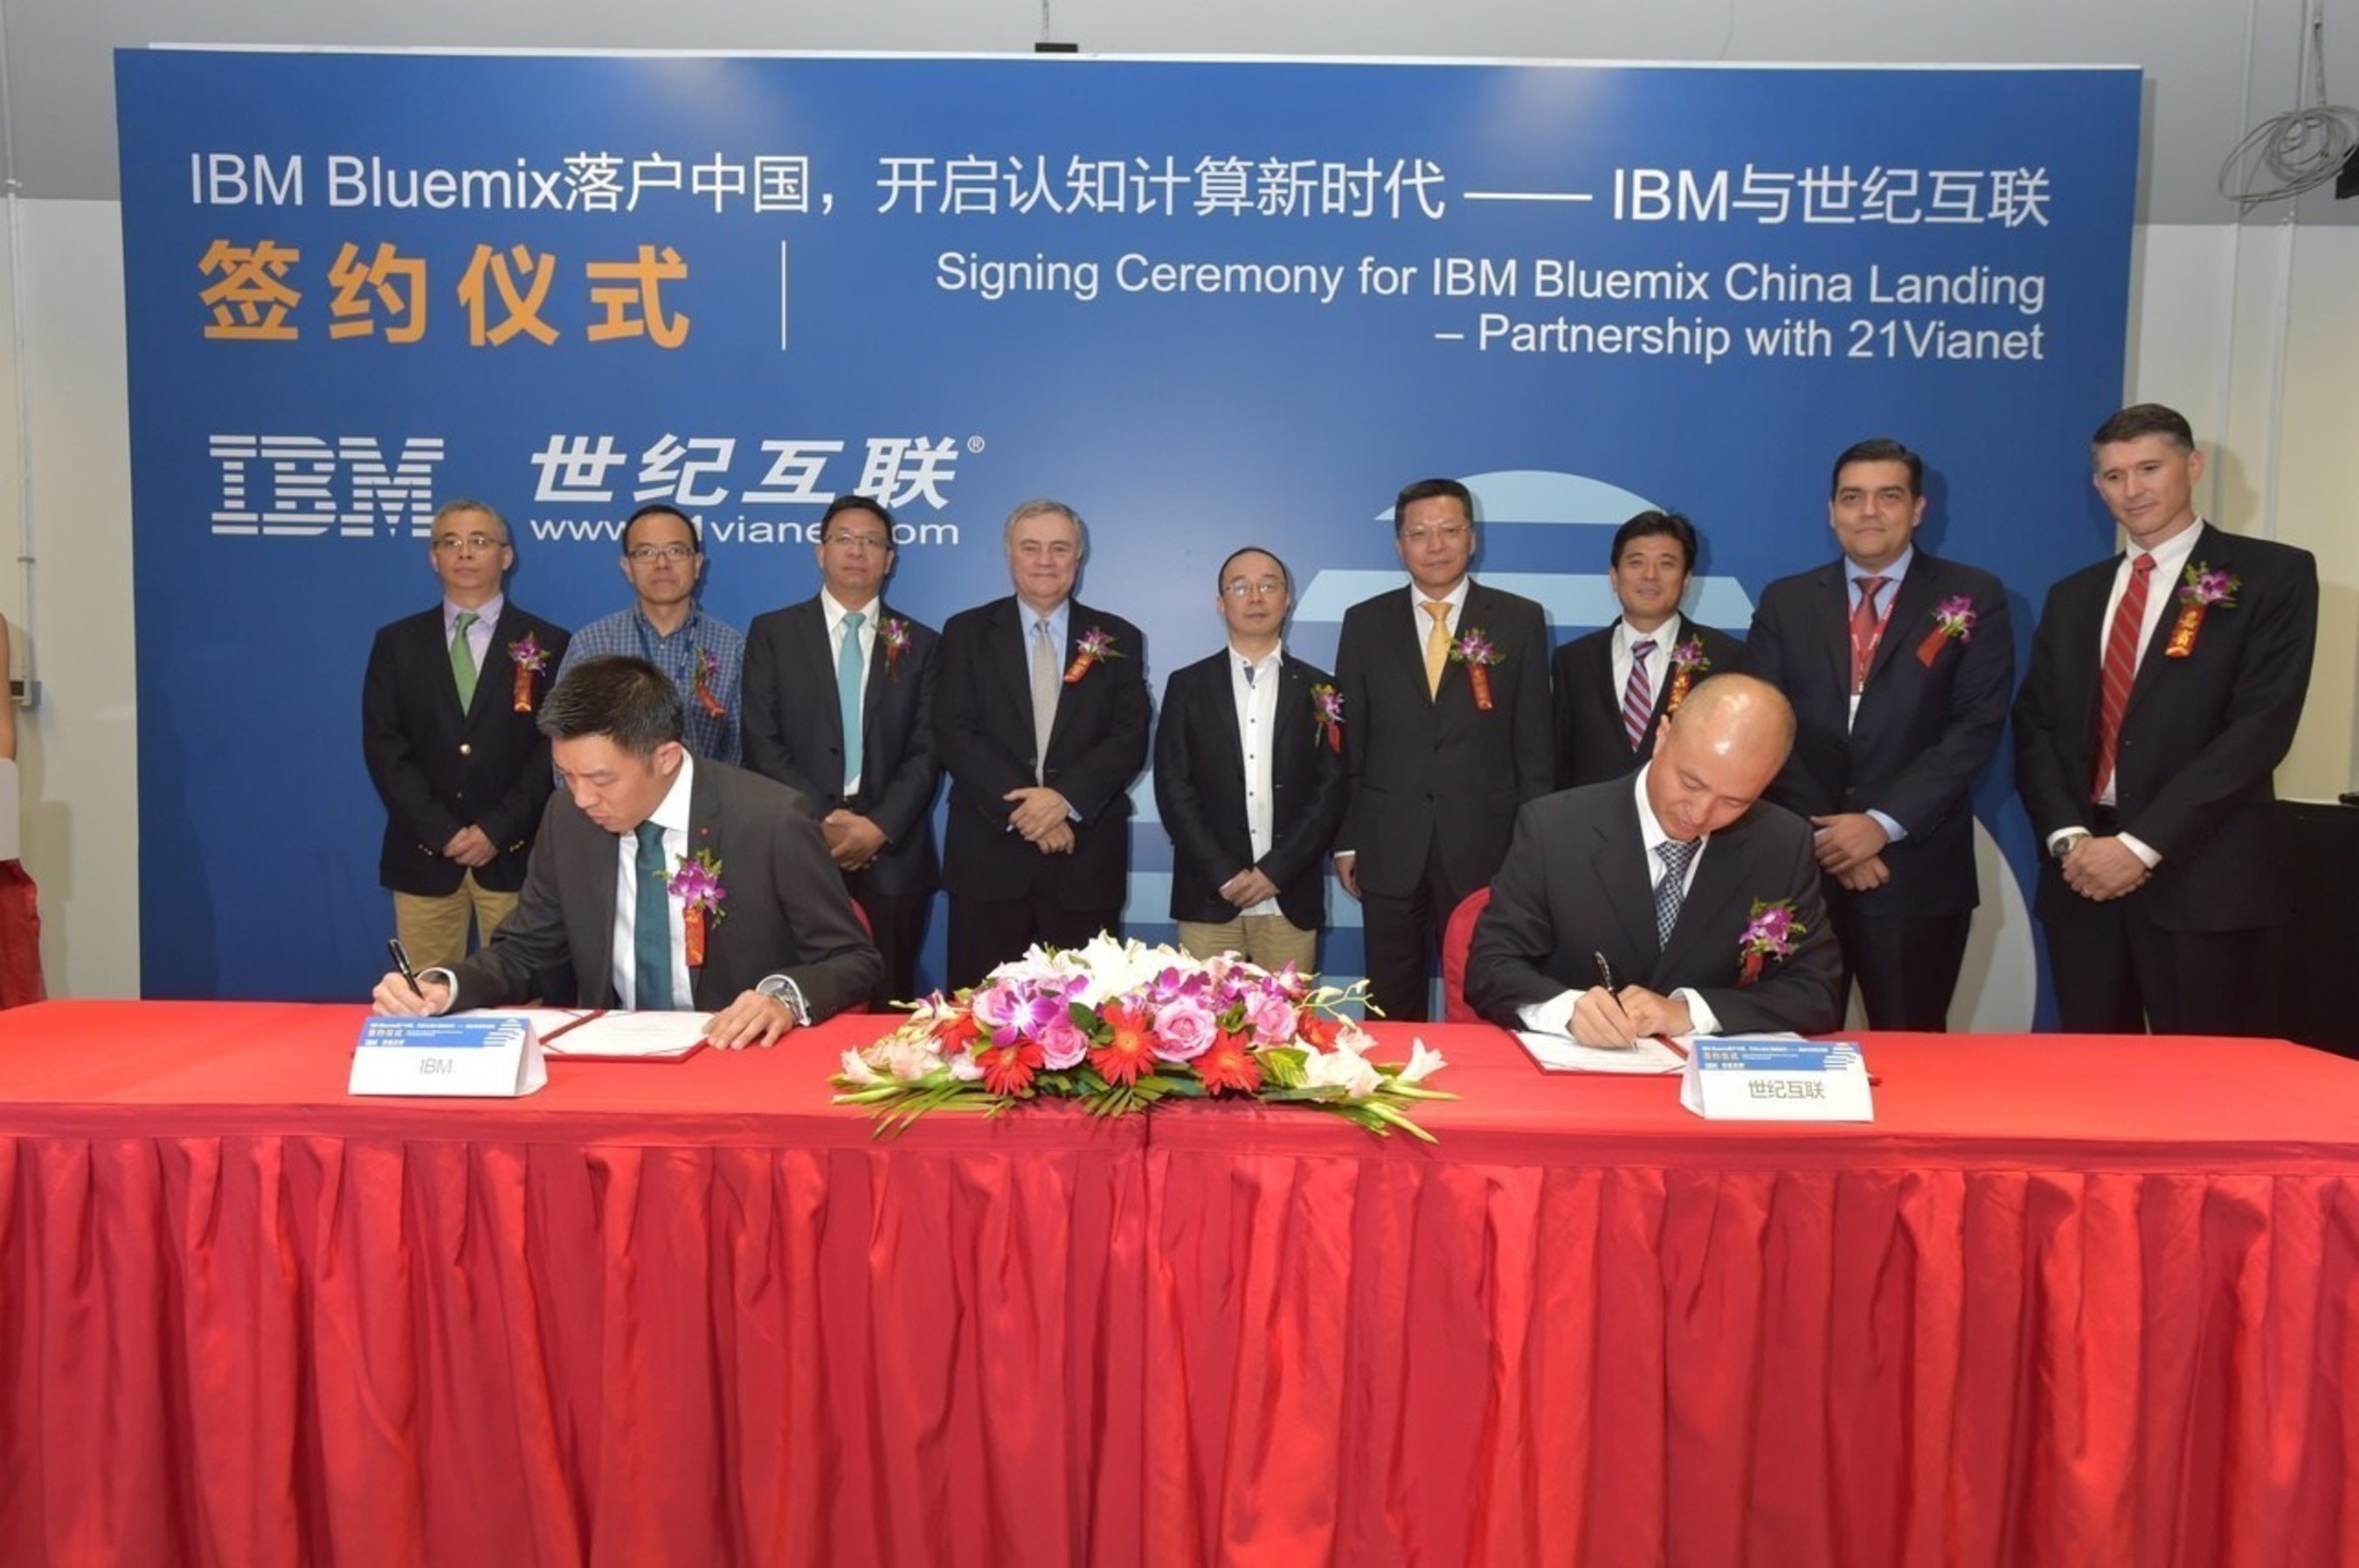 Ernie Hu, General Manager for Cloud and Software, IBM Greater China Group, and Ning Qi, Executive Vice President of 21Vianet Group, ink a deal to bring IBM's Bluemix Cloud Platform to China.